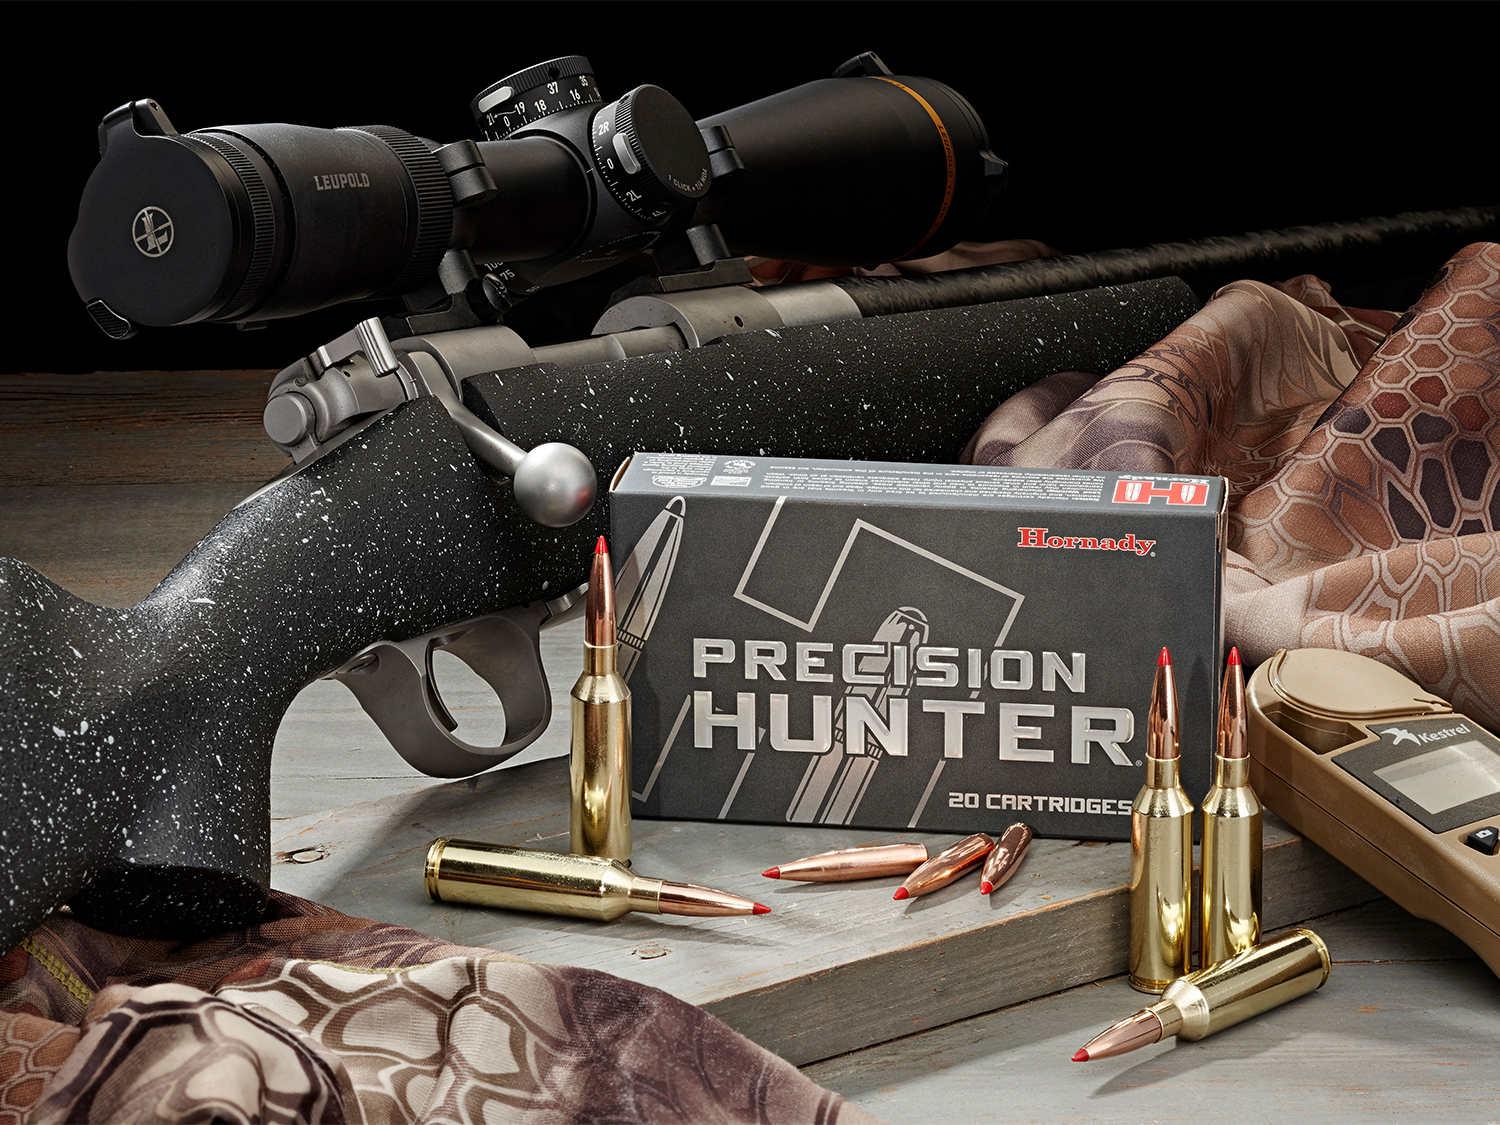 A box of Hornady rifle ammo next to a bolt-action rifle.